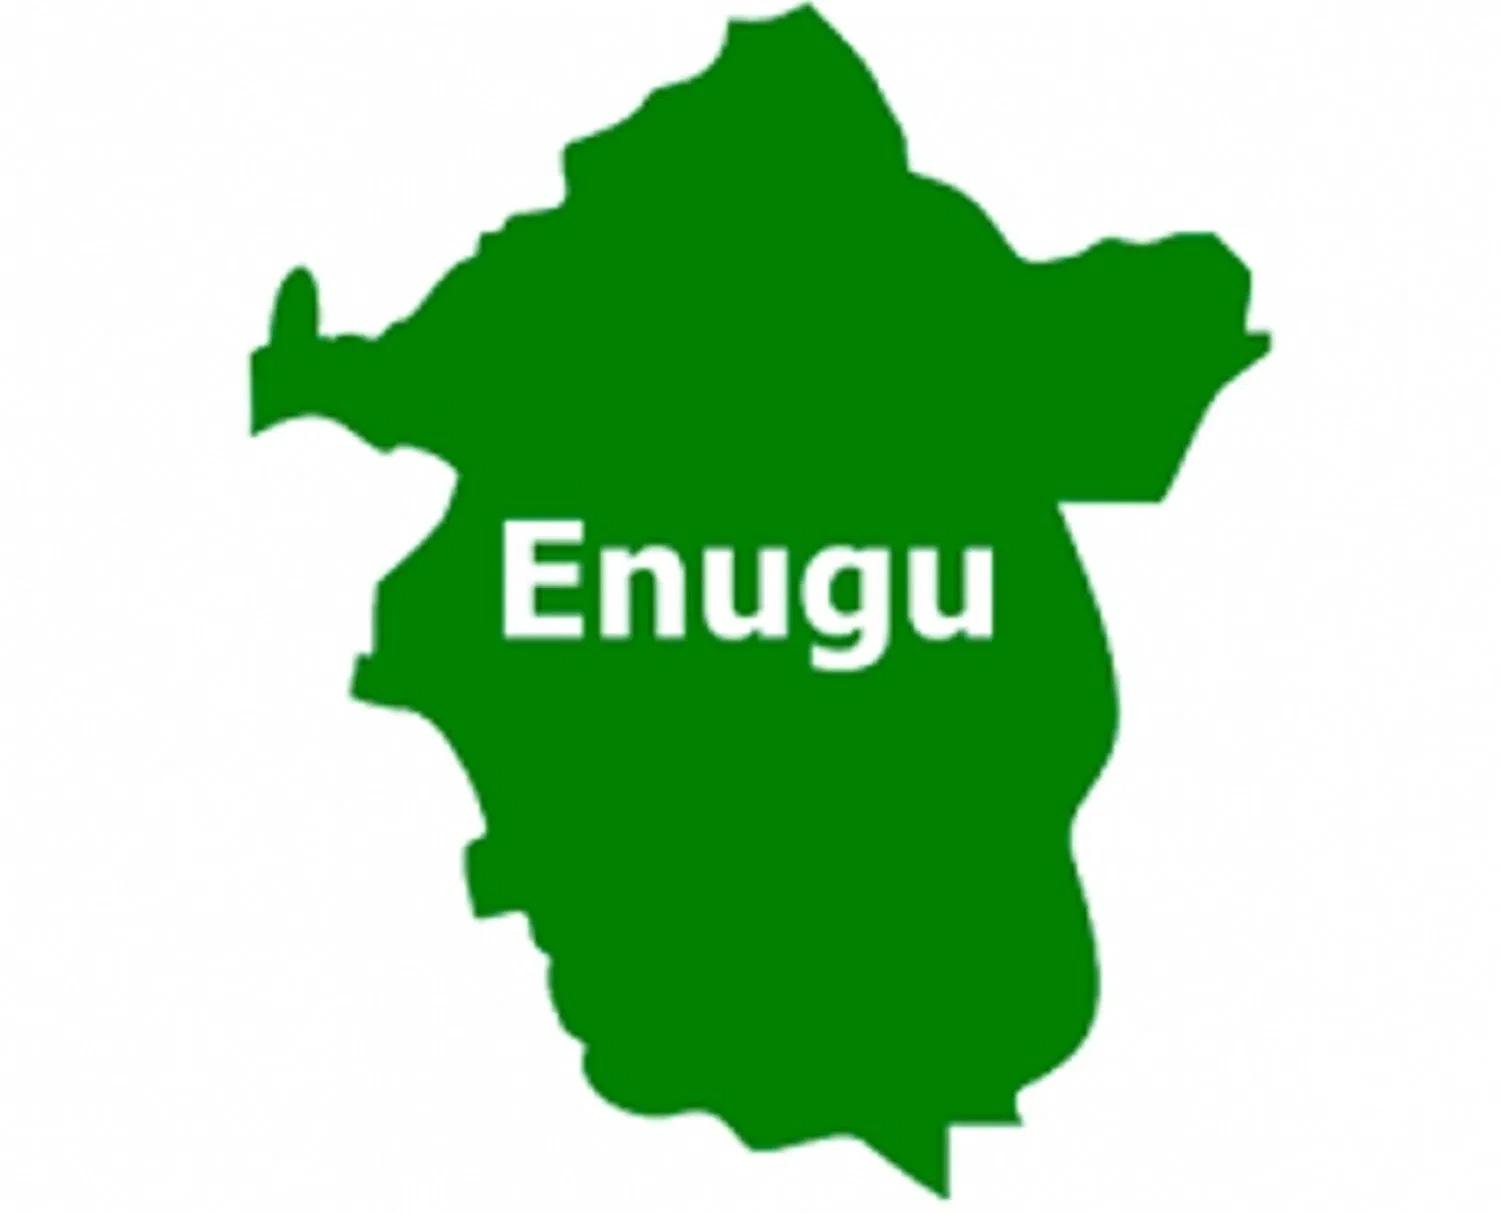 Natives collaborate with herders in kidnappings in Enugu communities  —Victims - Vanguard News